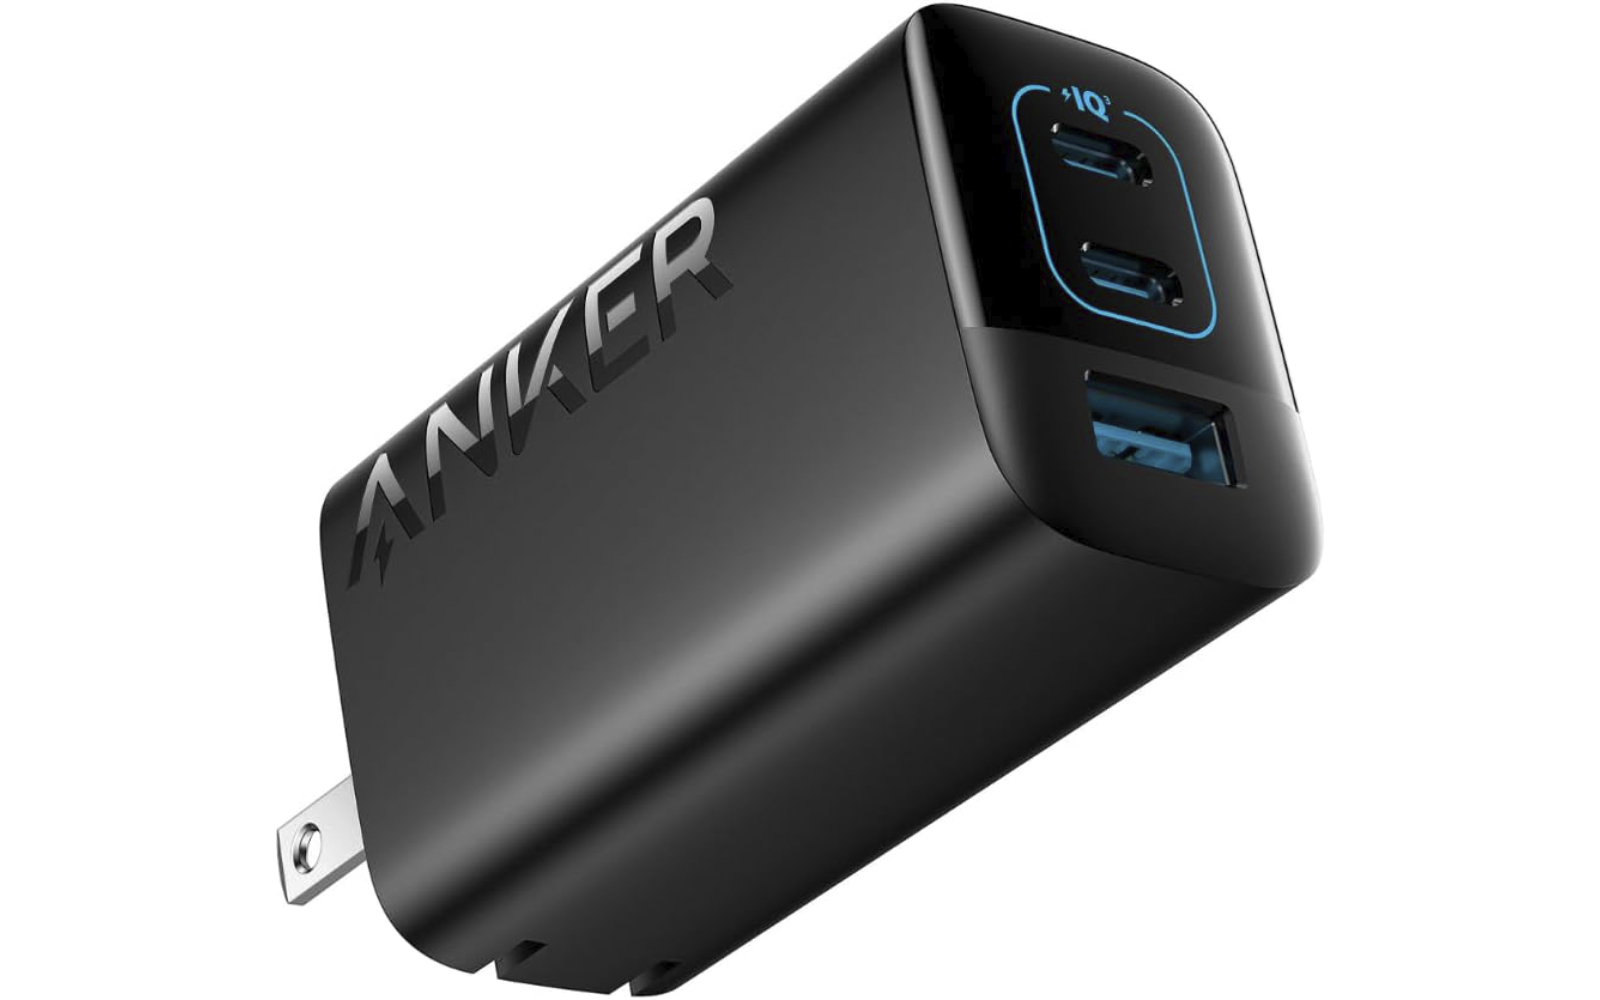 Anker-Charger-67W-3port-device.jpg